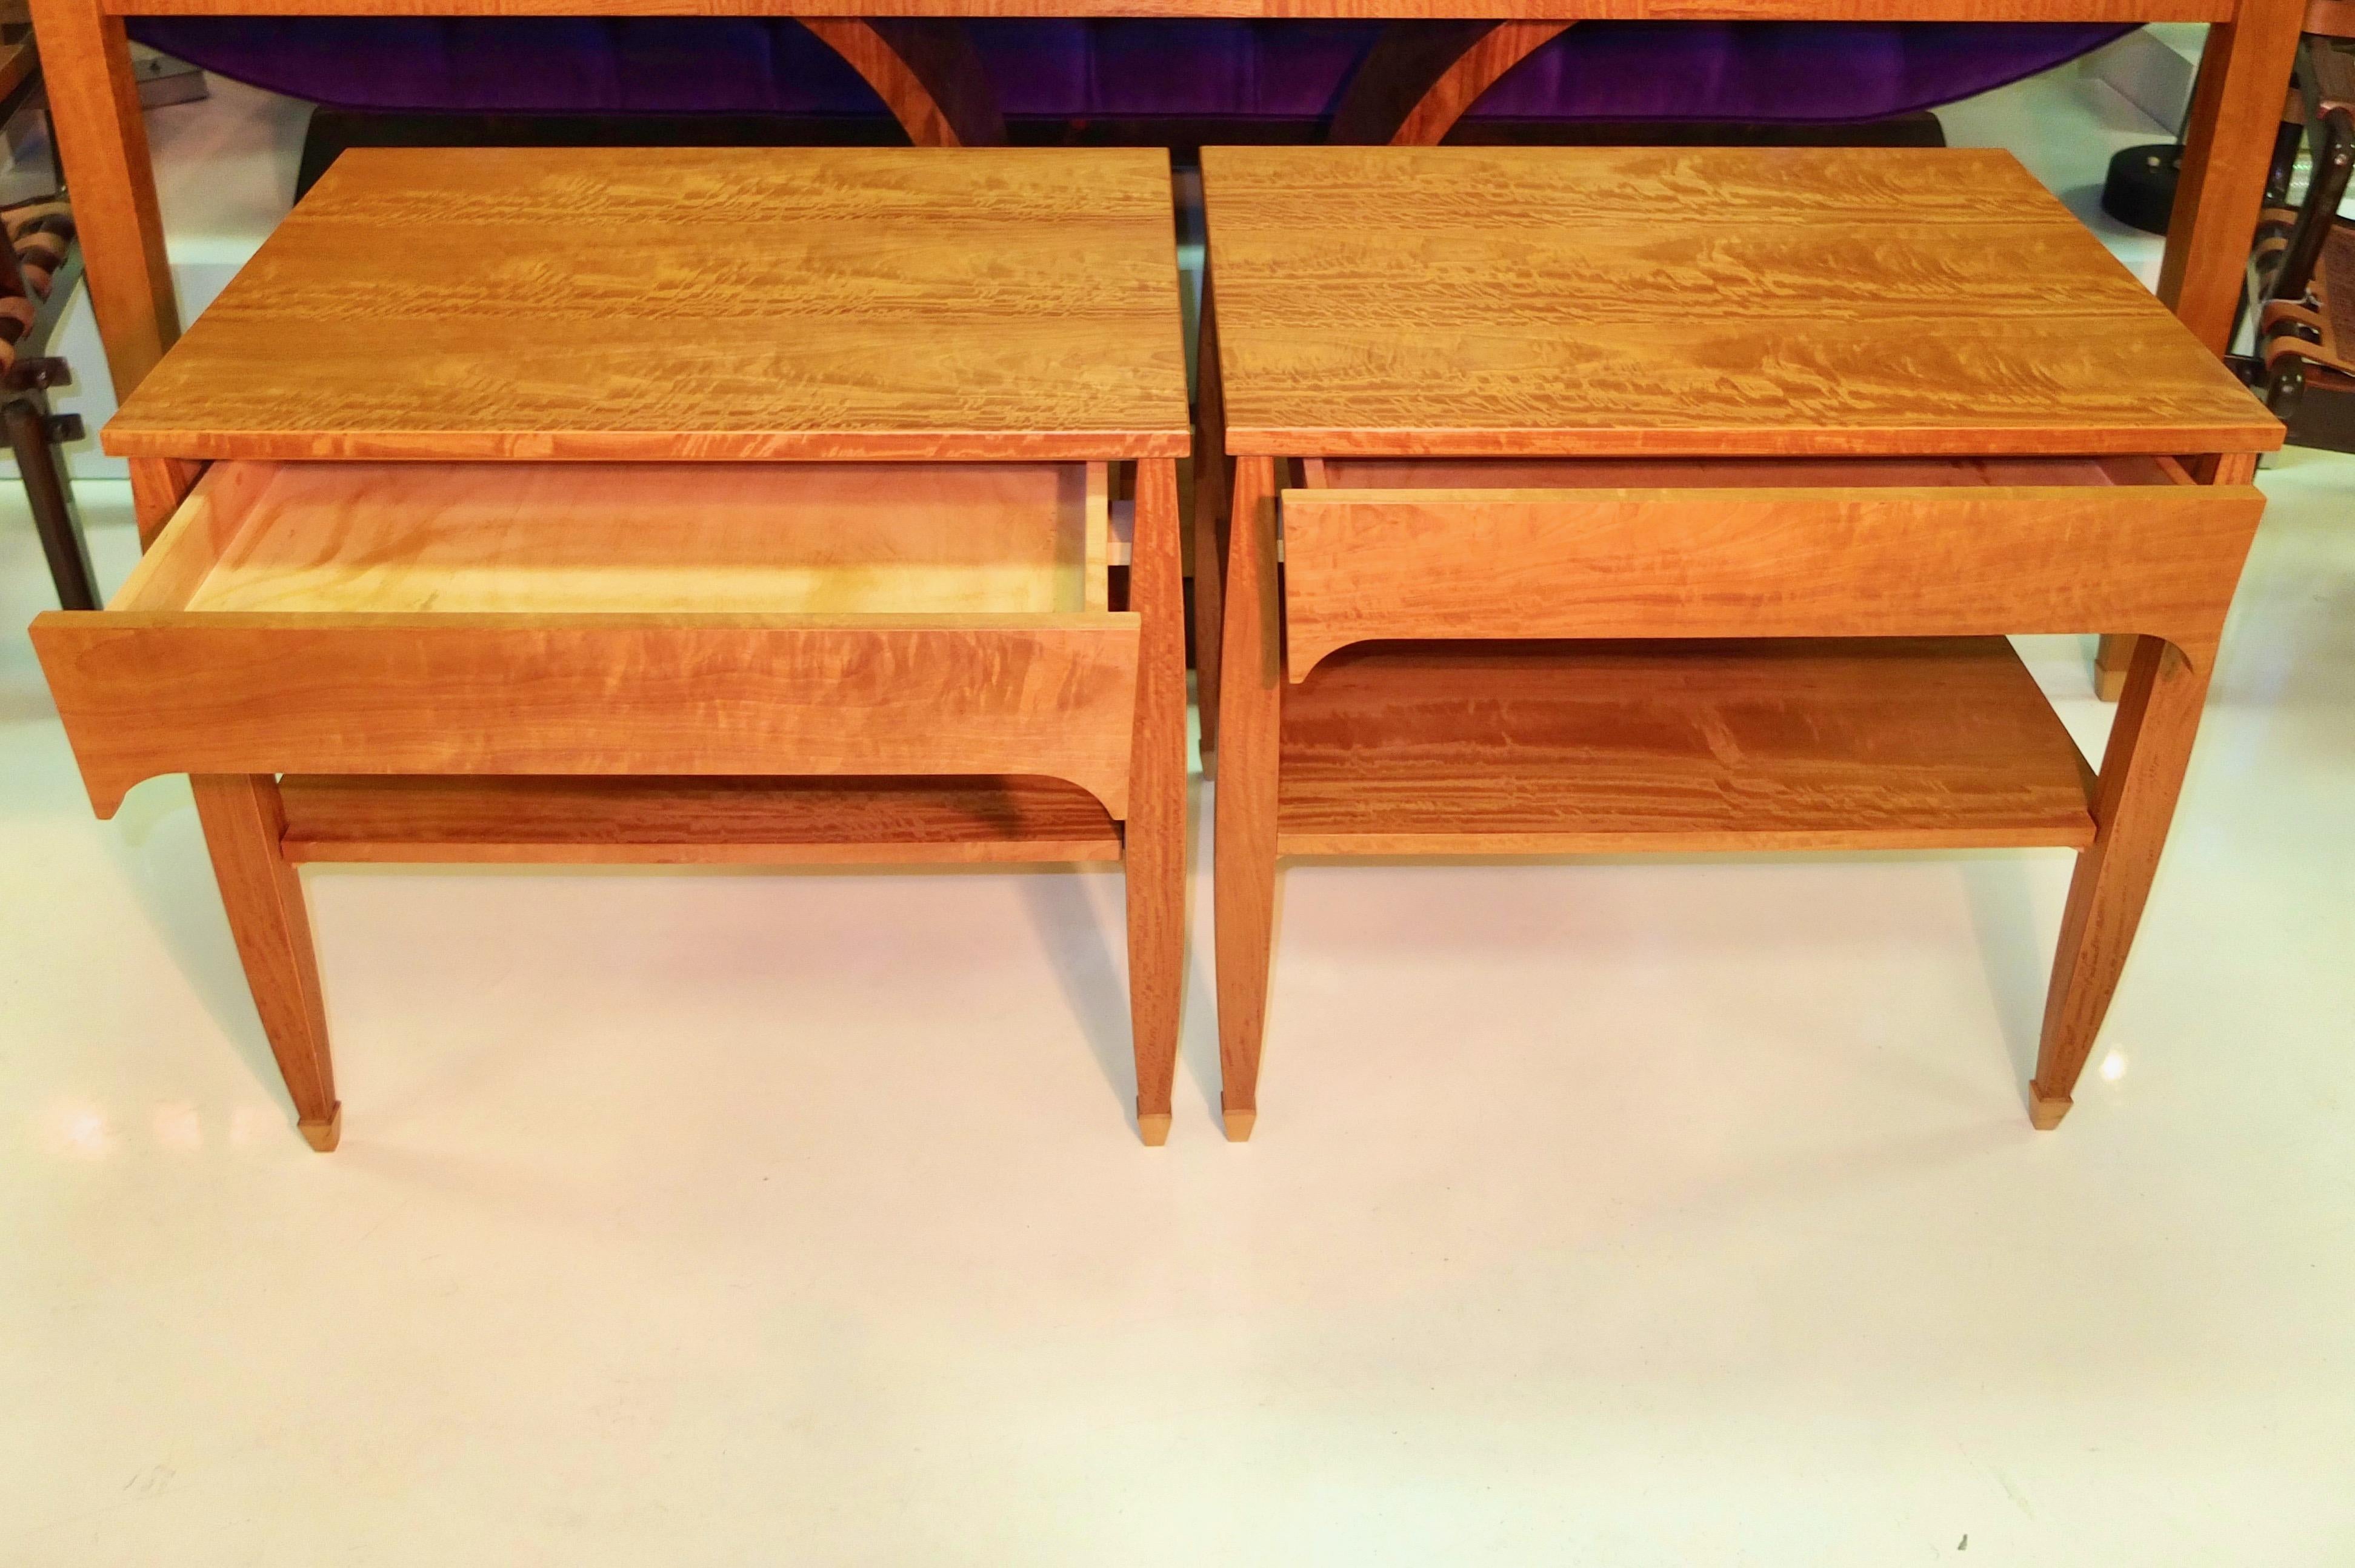 Pair Studio Craft Satinwood Single Drawer Side Tables by Gregg Lipton In Good Condition For Sale In Hanover, MA